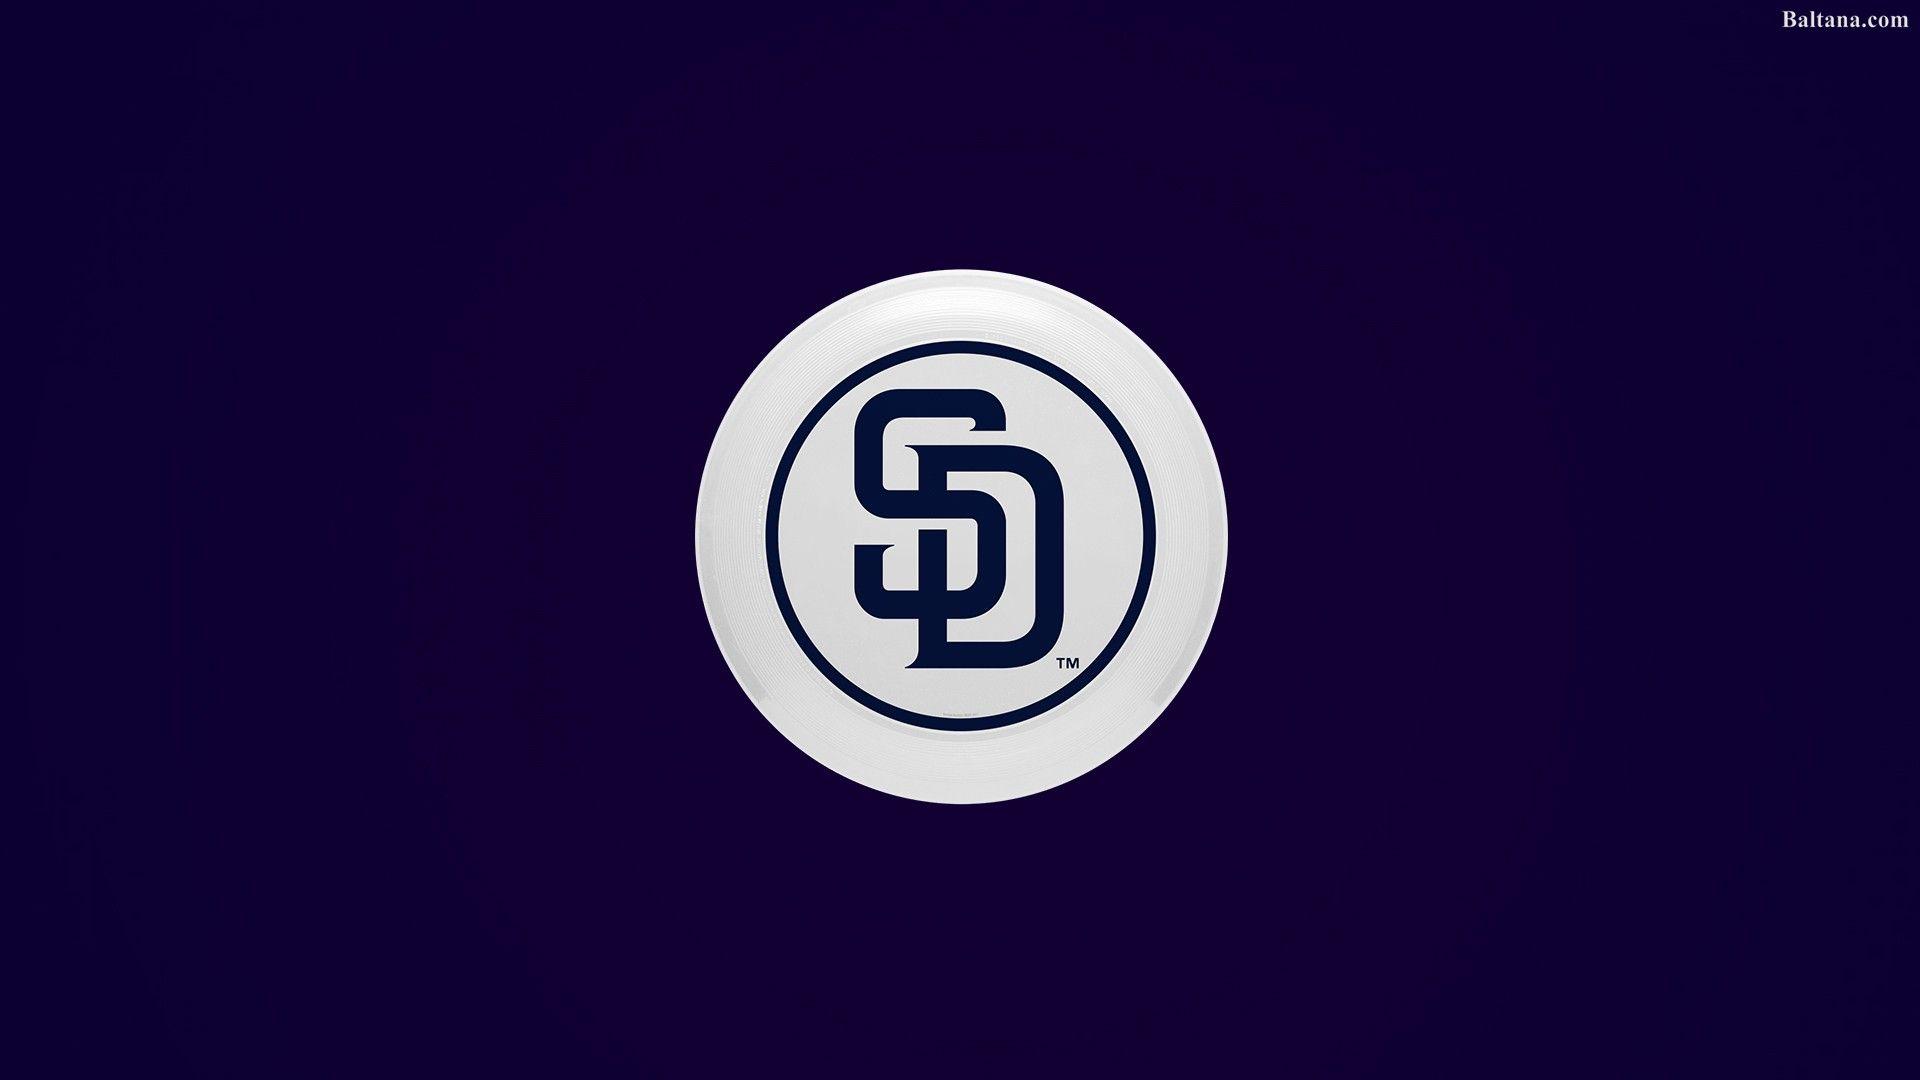 San Diego Padres wallpaper by eddy0513  Download on ZEDGE  cd0a